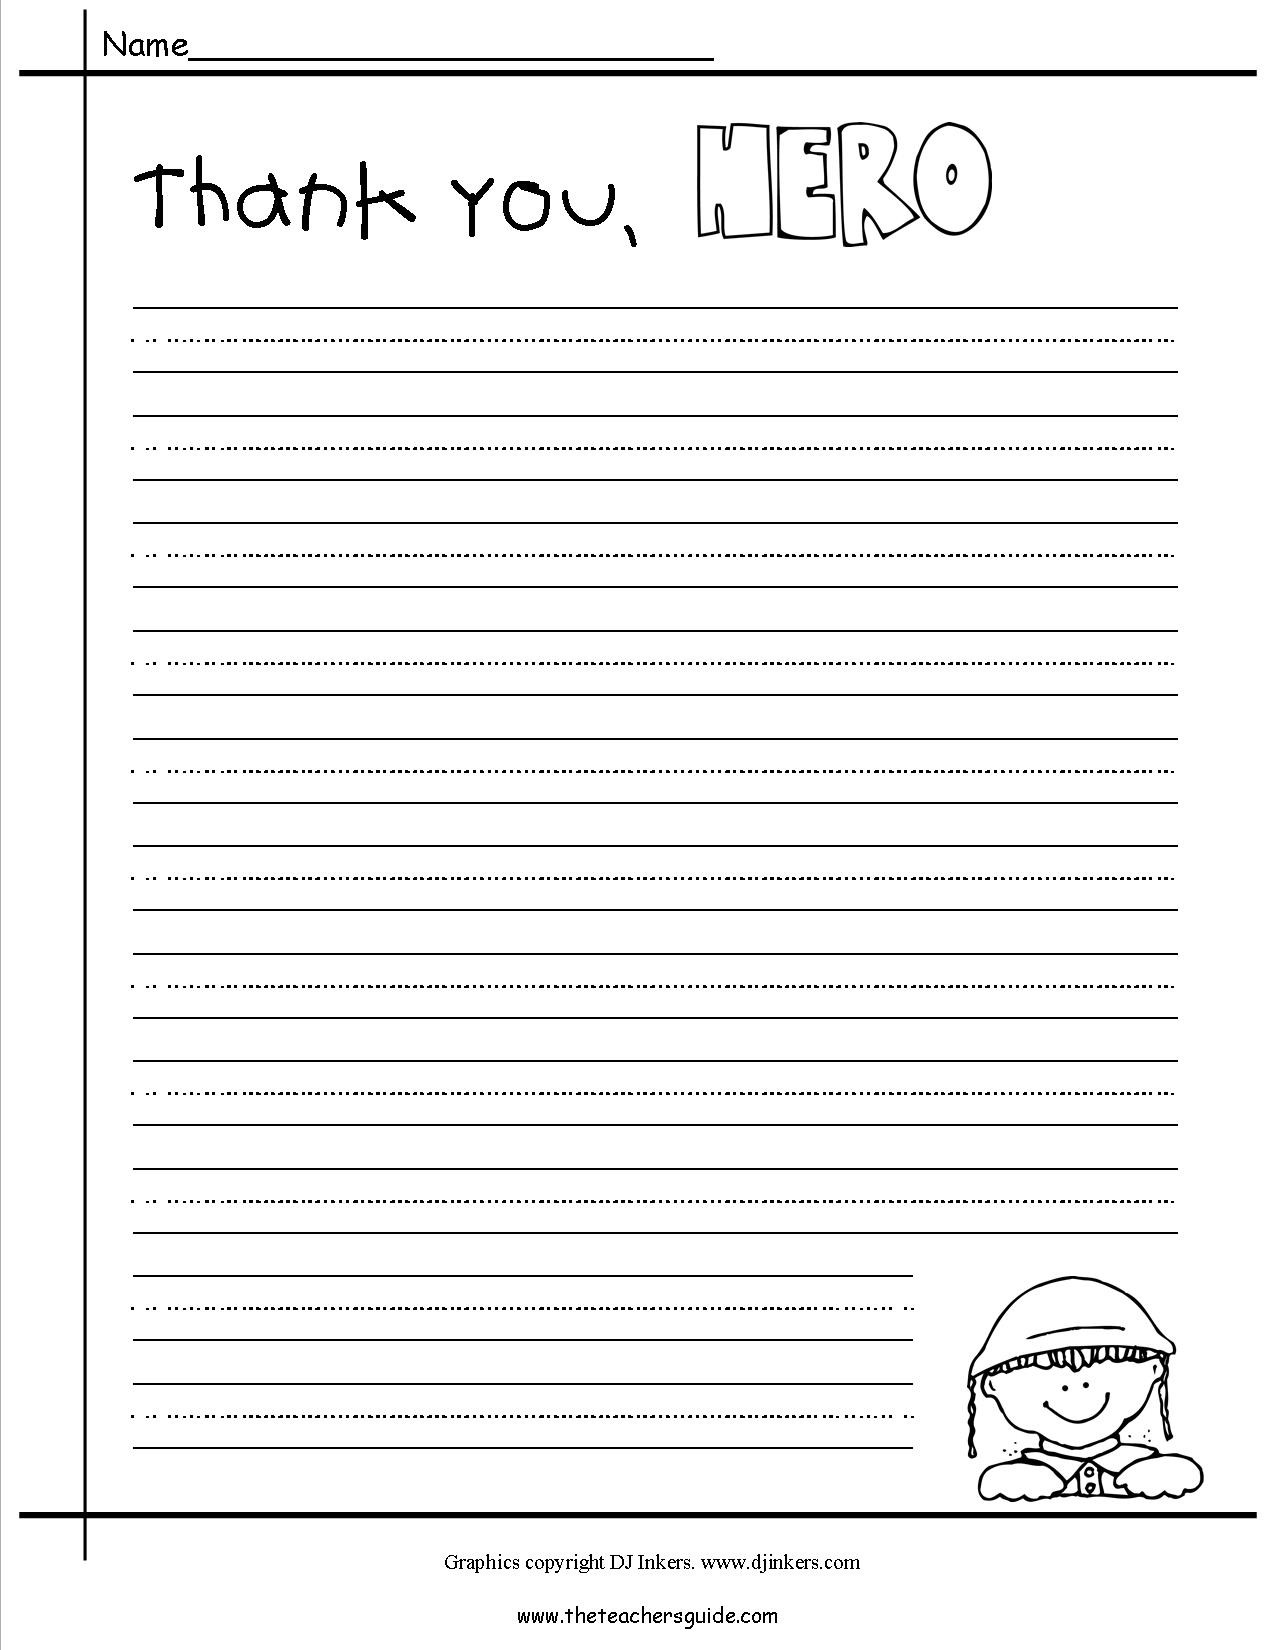 Veterans Day Letter Template - Veterans Day Thank You Letter Template